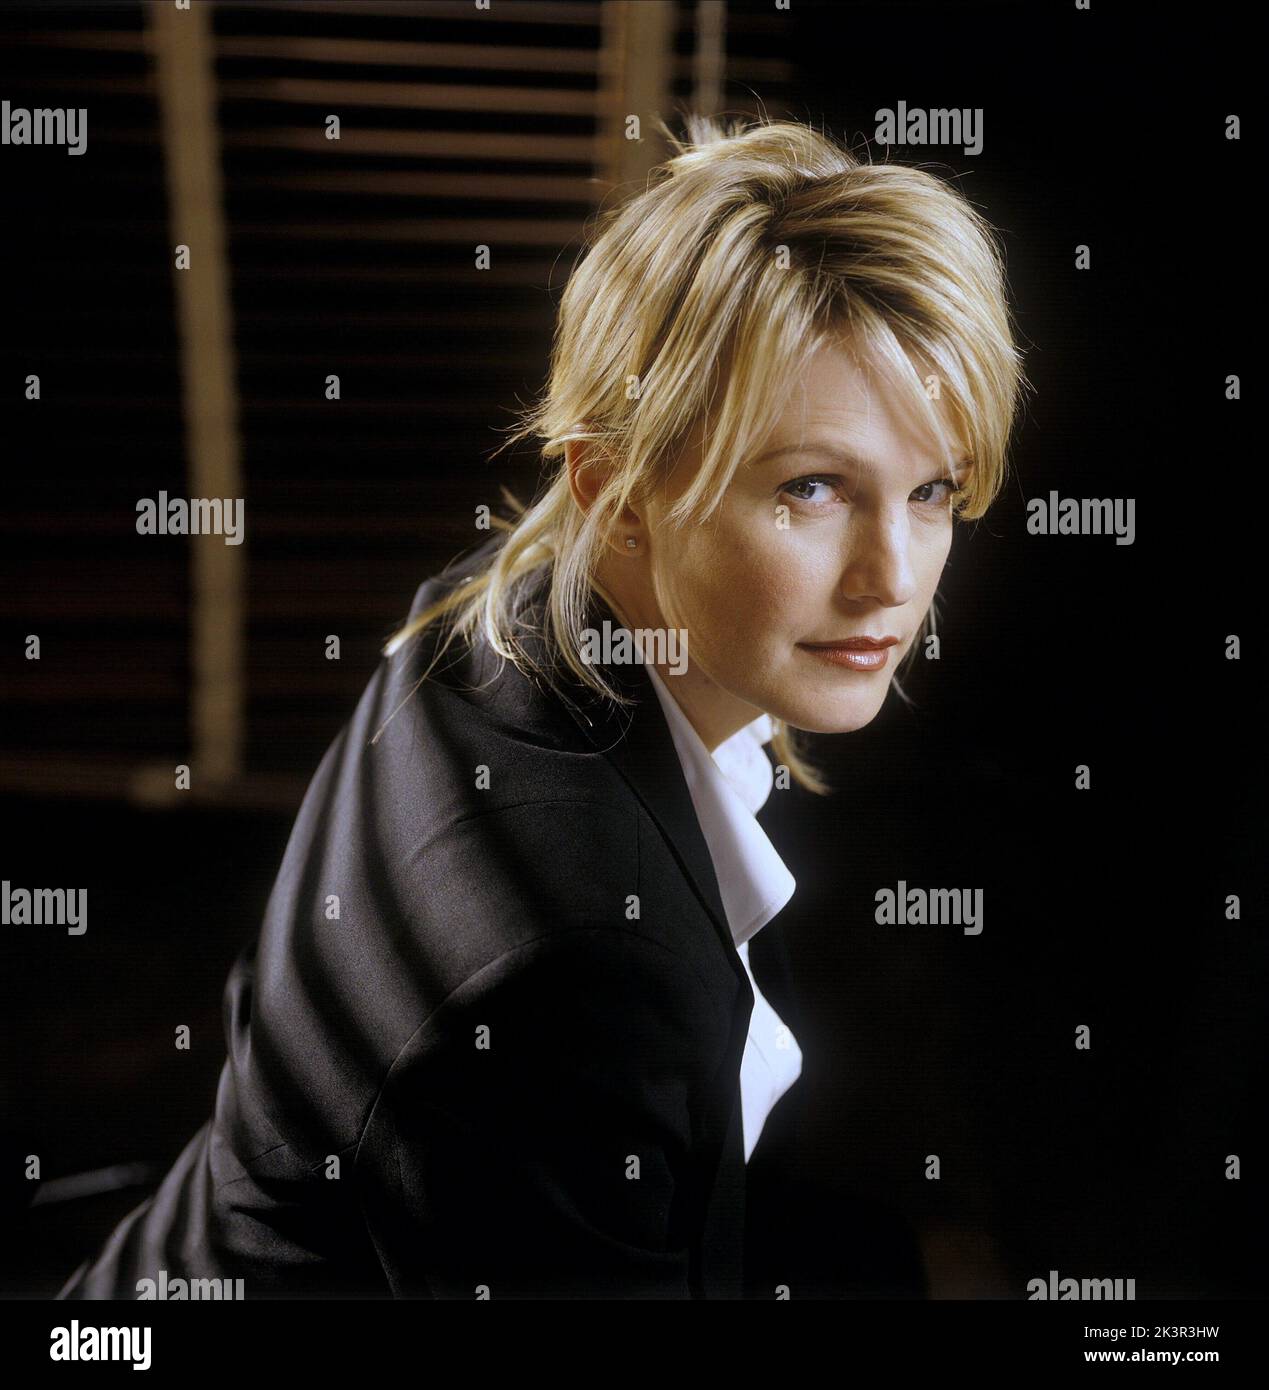 https://c8.alamy.com/comp/2K3R3HW/kathryn-morris-television-cold-case-season-3-2005-characters-lilly-rush-25-september-2005-warning-this-photograph-is-for-editorial-use-only-and-is-the-copyright-of-cbs-television-andor-the-photographer-assigned-by-the-film-or-production-company-and-can-only-be-reproduced-by-publications-in-conjunction-with-the-promotion-of-the-above-film-a-mandatory-credit-to-cbs-television-is-required-the-photographer-should-also-be-credited-when-known-no-commercial-use-can-be-granted-without-written-authority-from-the-film-company-2K3R3HW.jpg